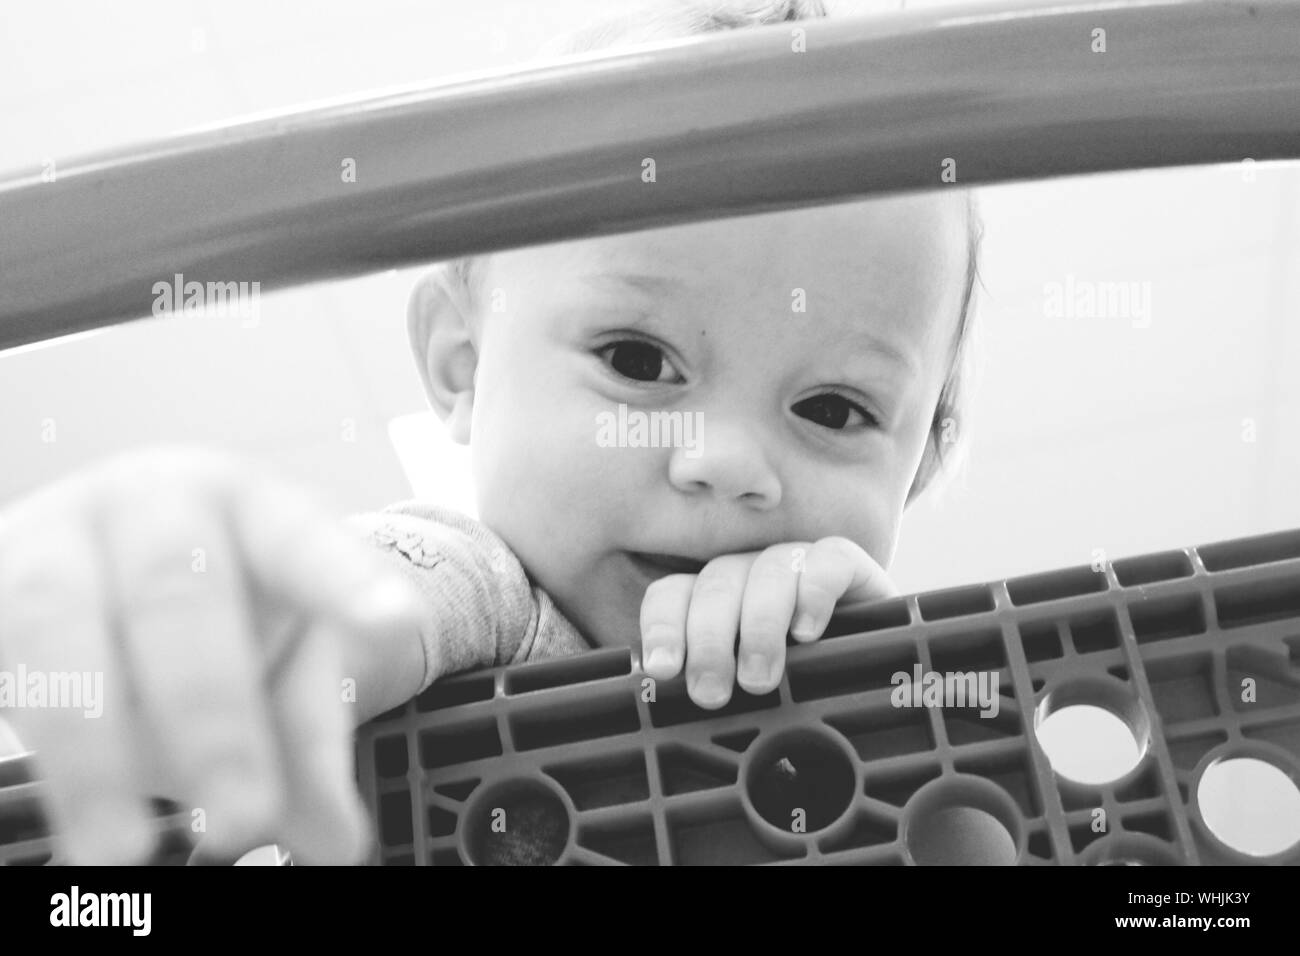 Portrait Of Cute Baby Seen Through Shopping Cart At Super Market Stock Photo